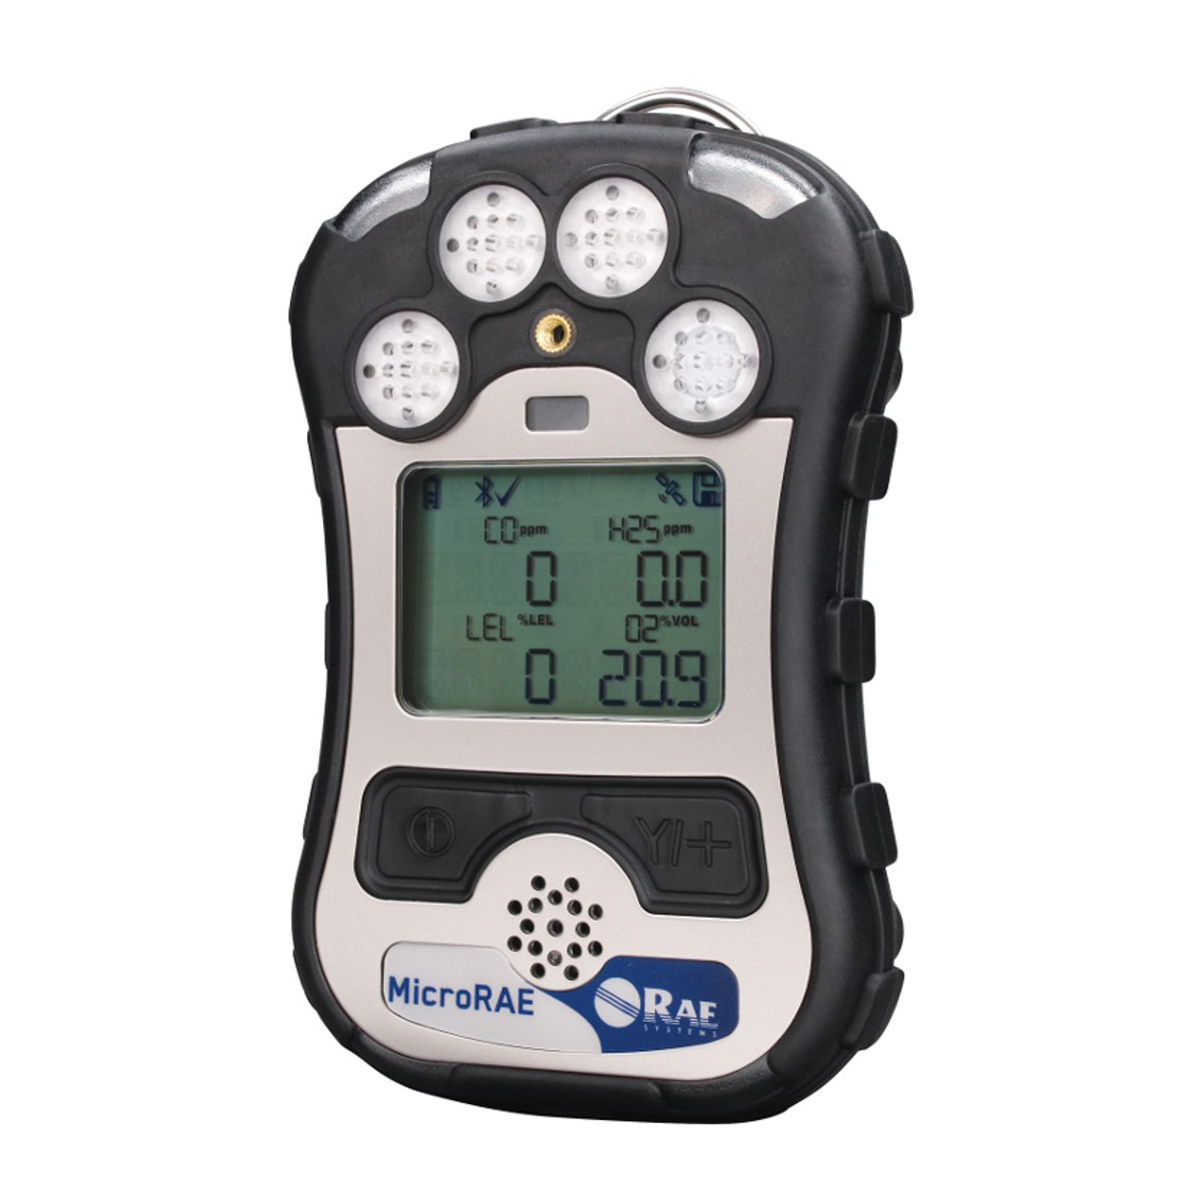 RAE® Systems MicroRAE™ Portable Combustible Gas, Carbon Monoxide, Hydrogen Sulfide And Oxygen Monitor